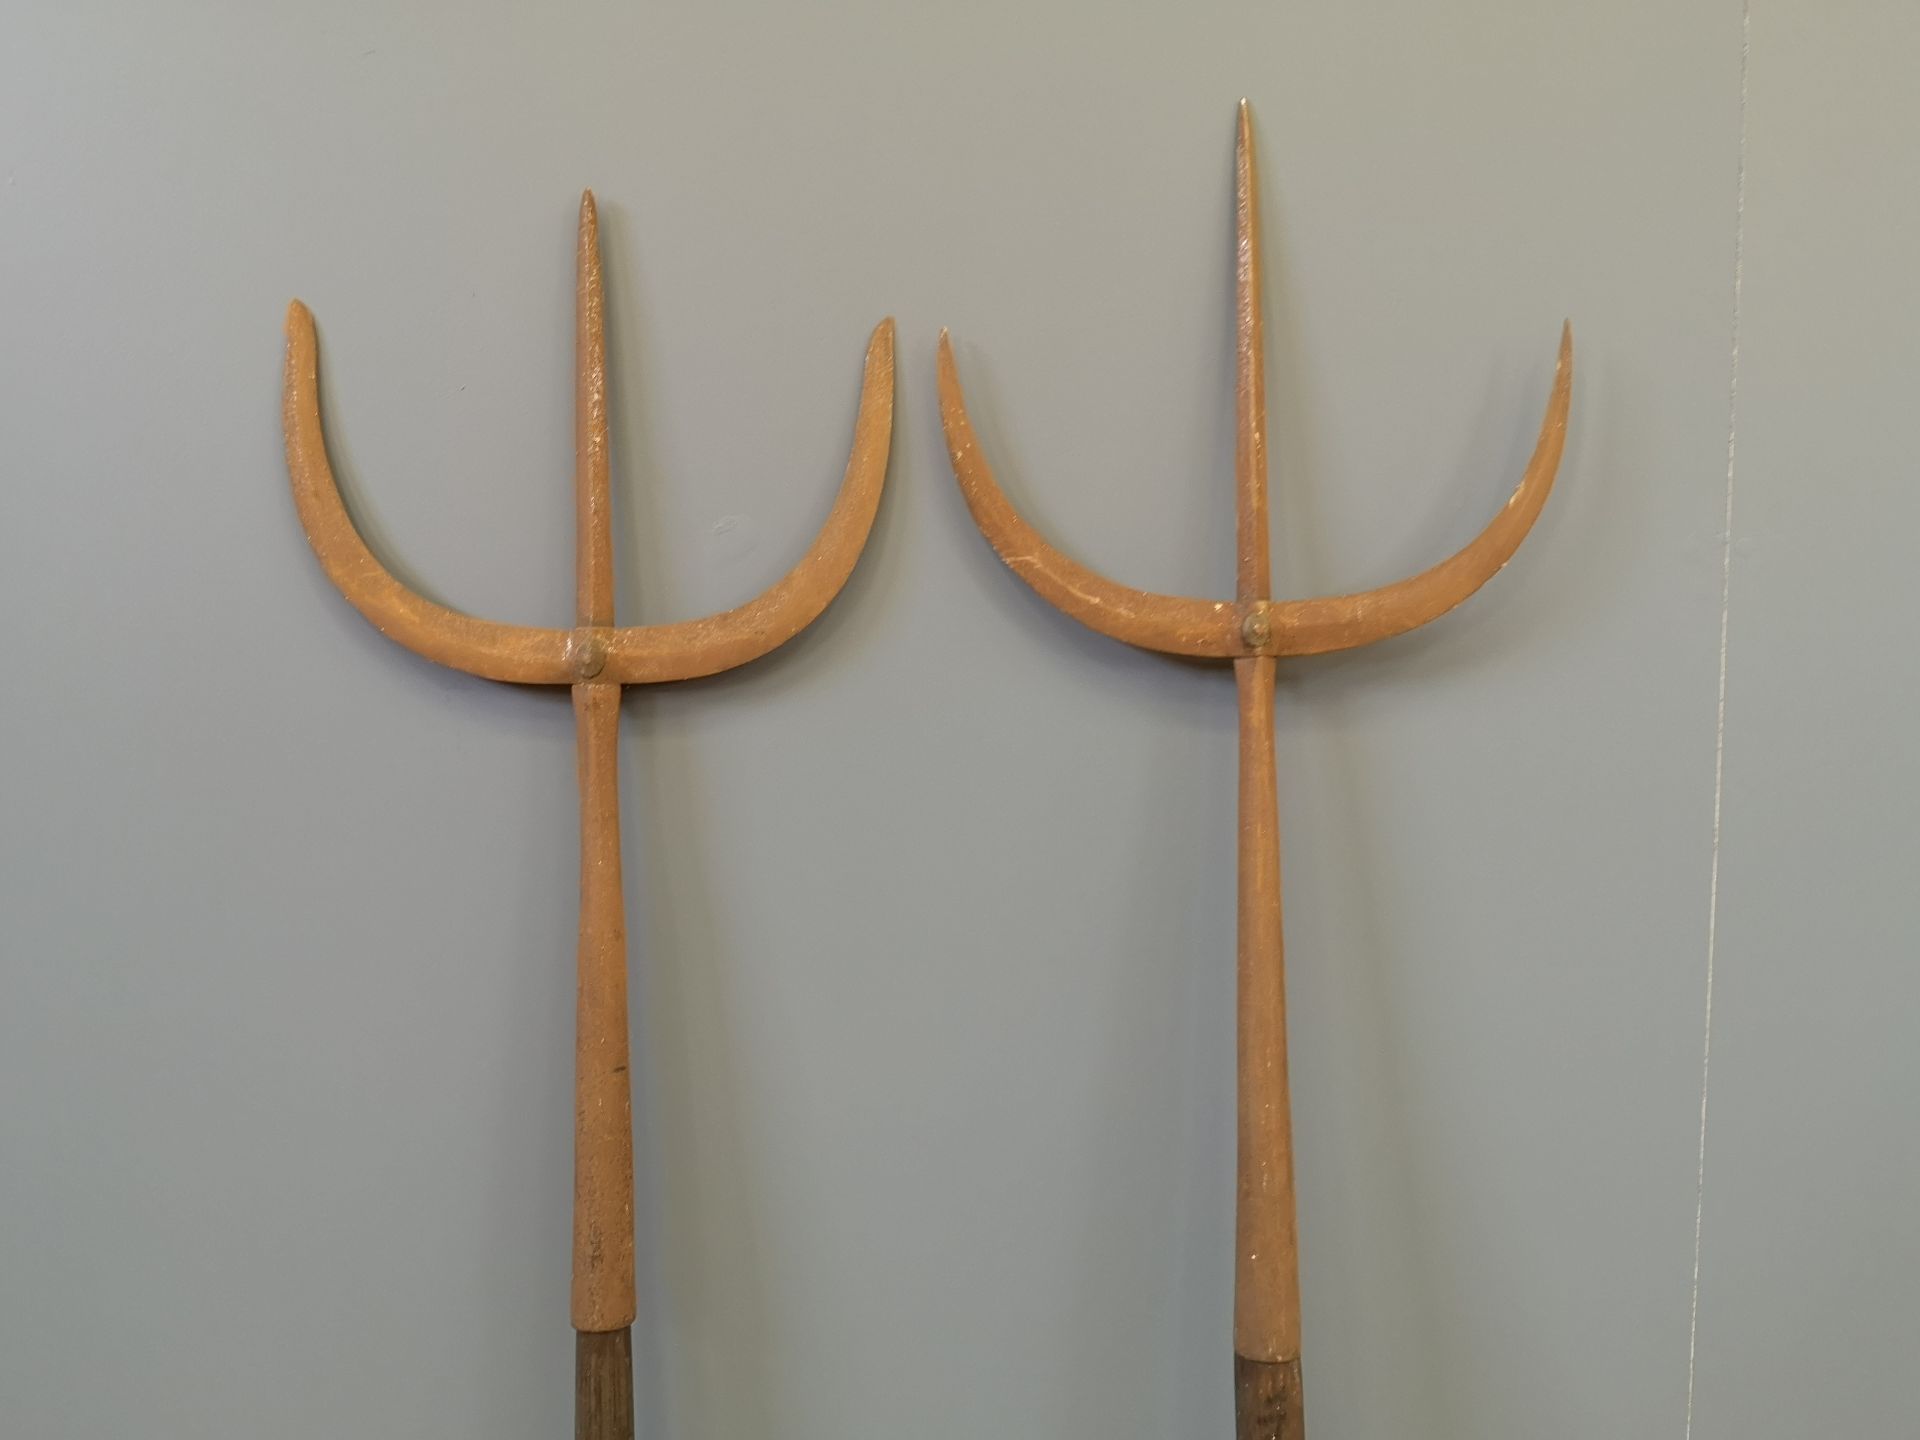 Two wood tridents with metal forks - Image 2 of 4